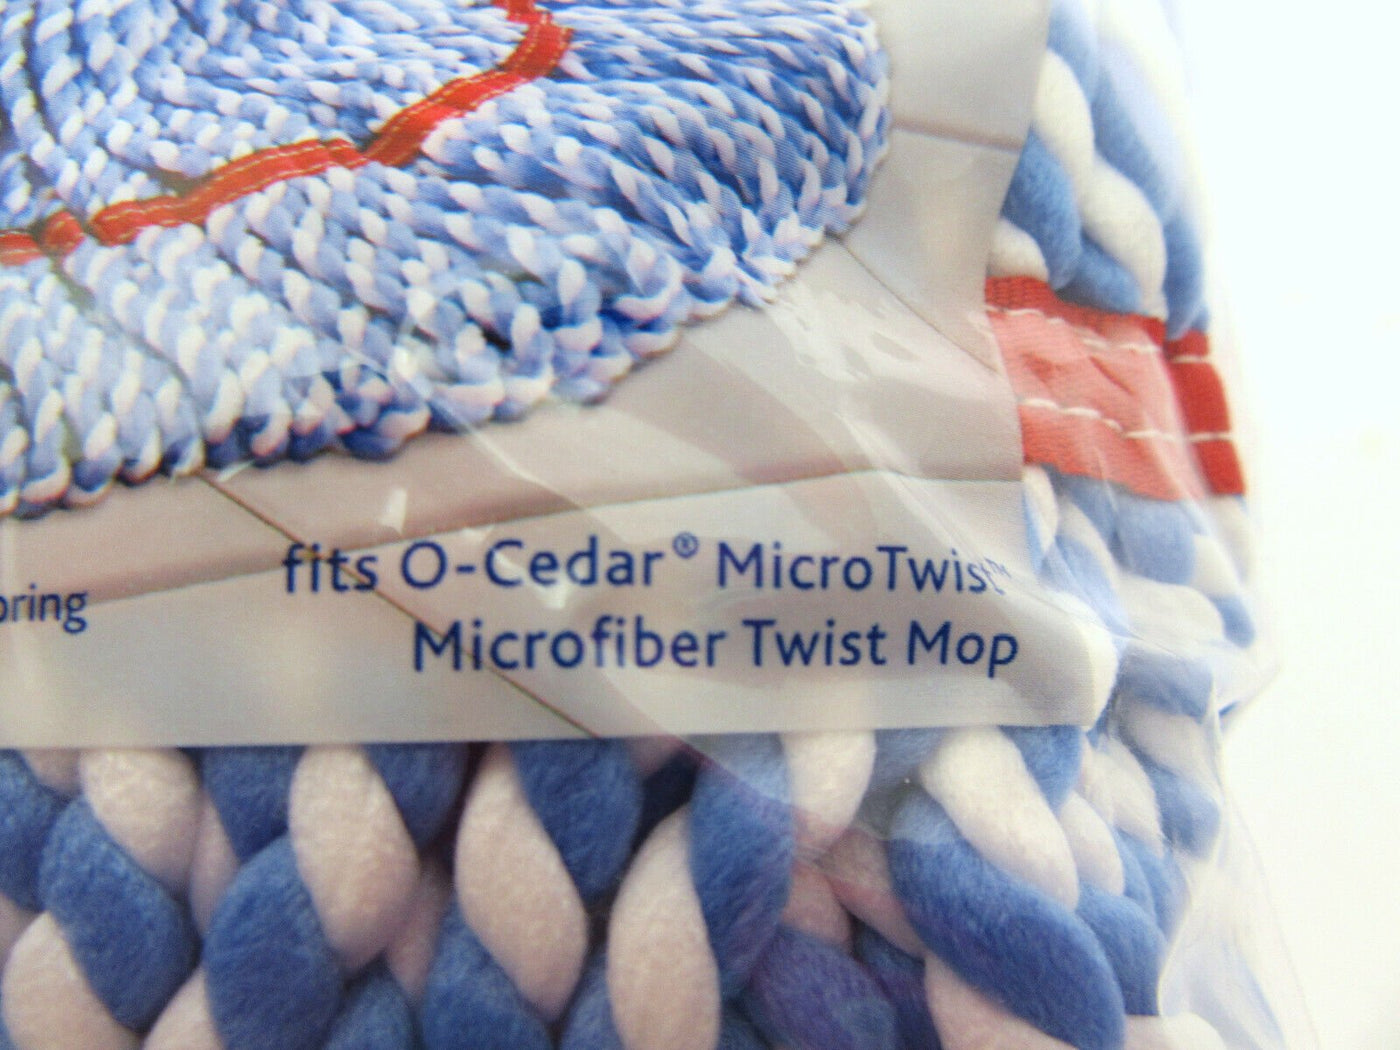 O Cedar ~ Microtwist ~ Mop Head Refill Cleaning ~ Supplies and Refills